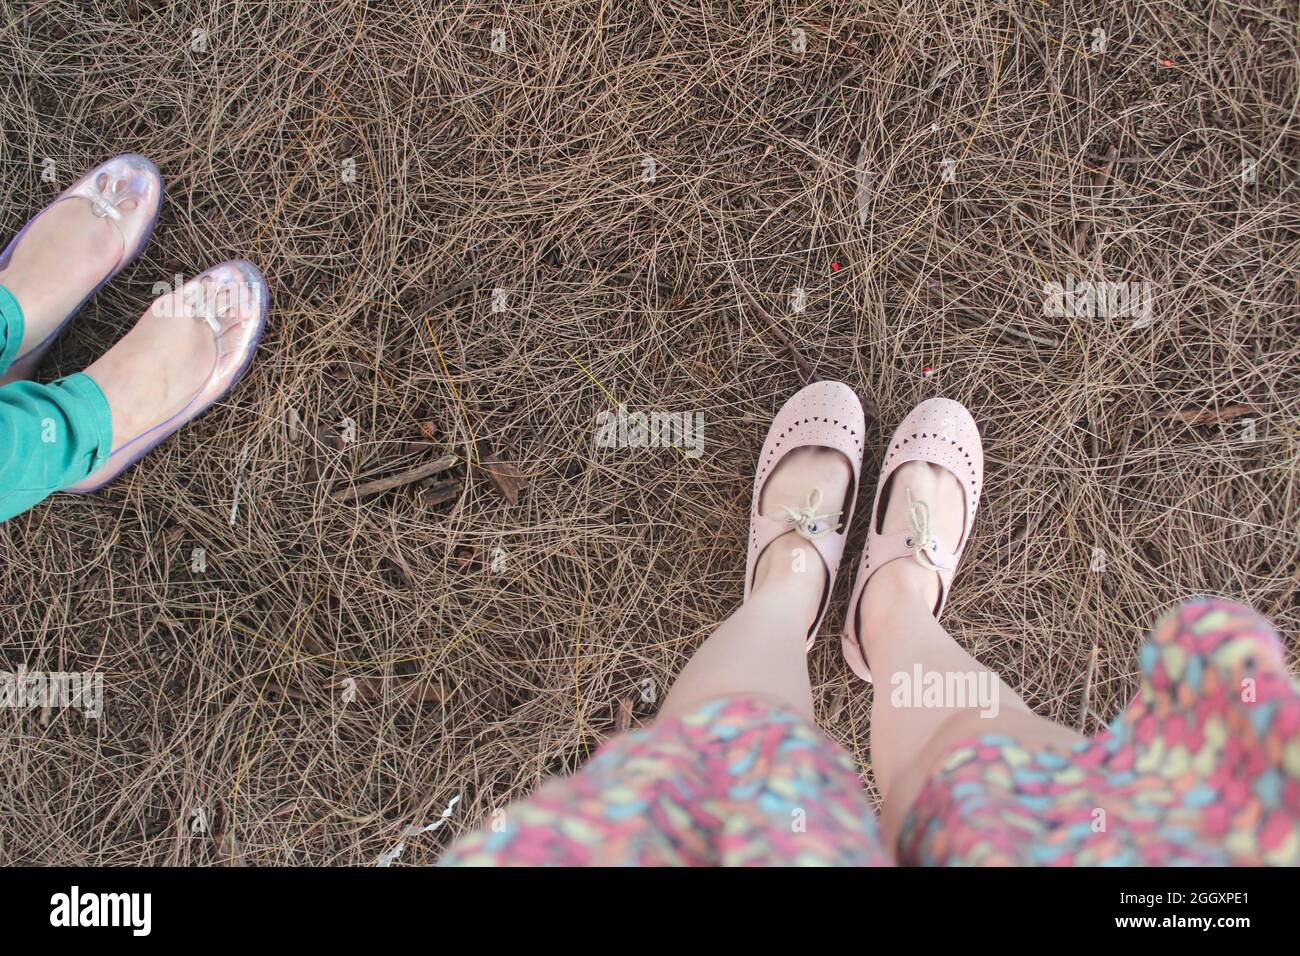 Two women standing on dried hay and grass with their feet showing. One  woman is wearing clear flat shoes and the other is wearing soft pink flats  Stock Photo - Alamy